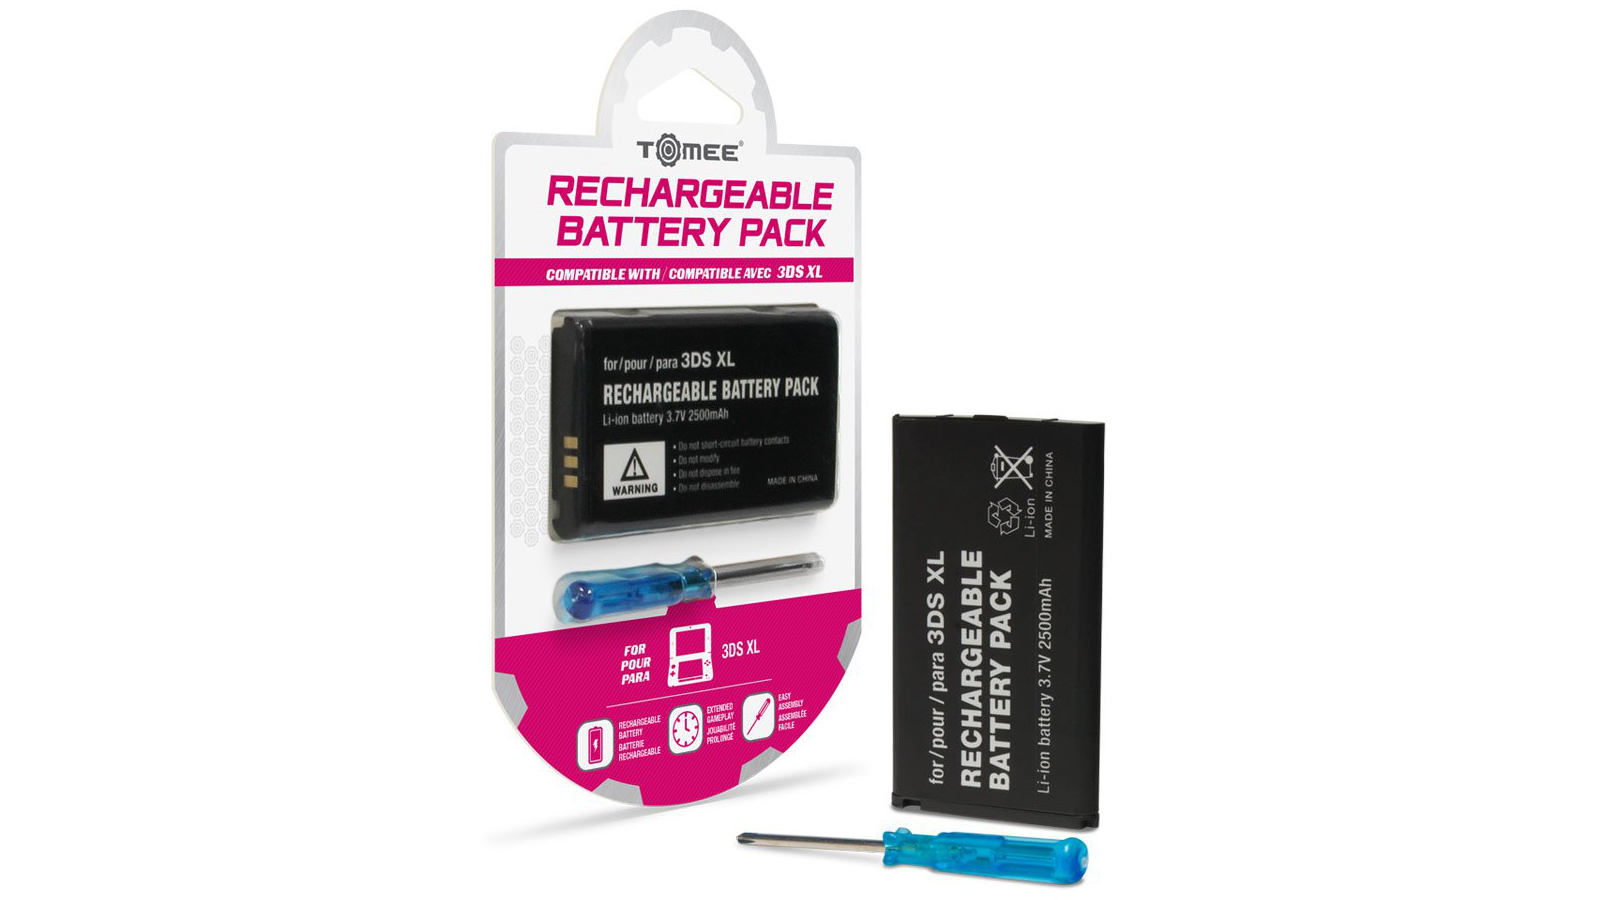 Tomee Rechargeable Battery Pack for New 3DS XL